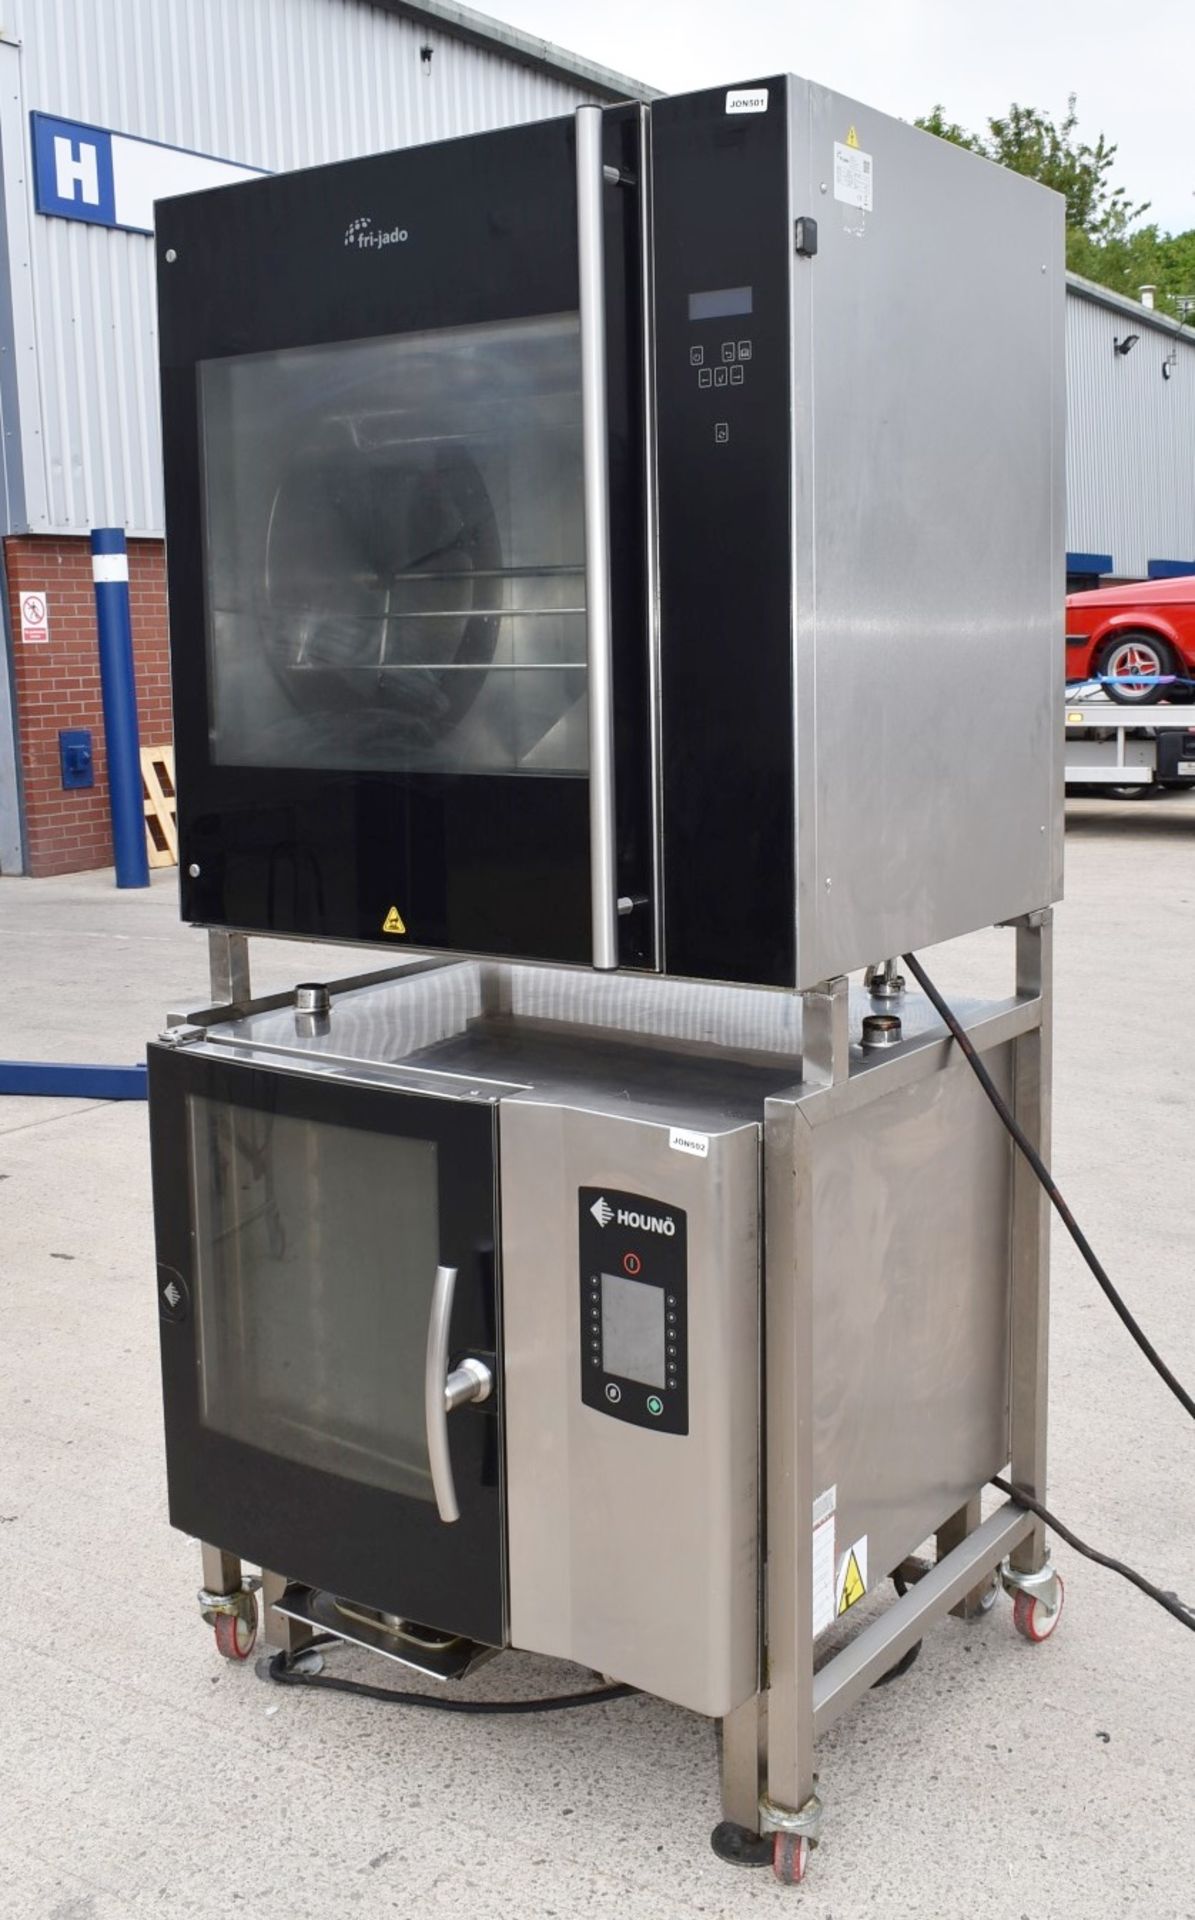 1 x Houno Electric Combi Oven and Fri-jado Rotisserie Oven Combo With Stand - 3 Phase - Image 7 of 22